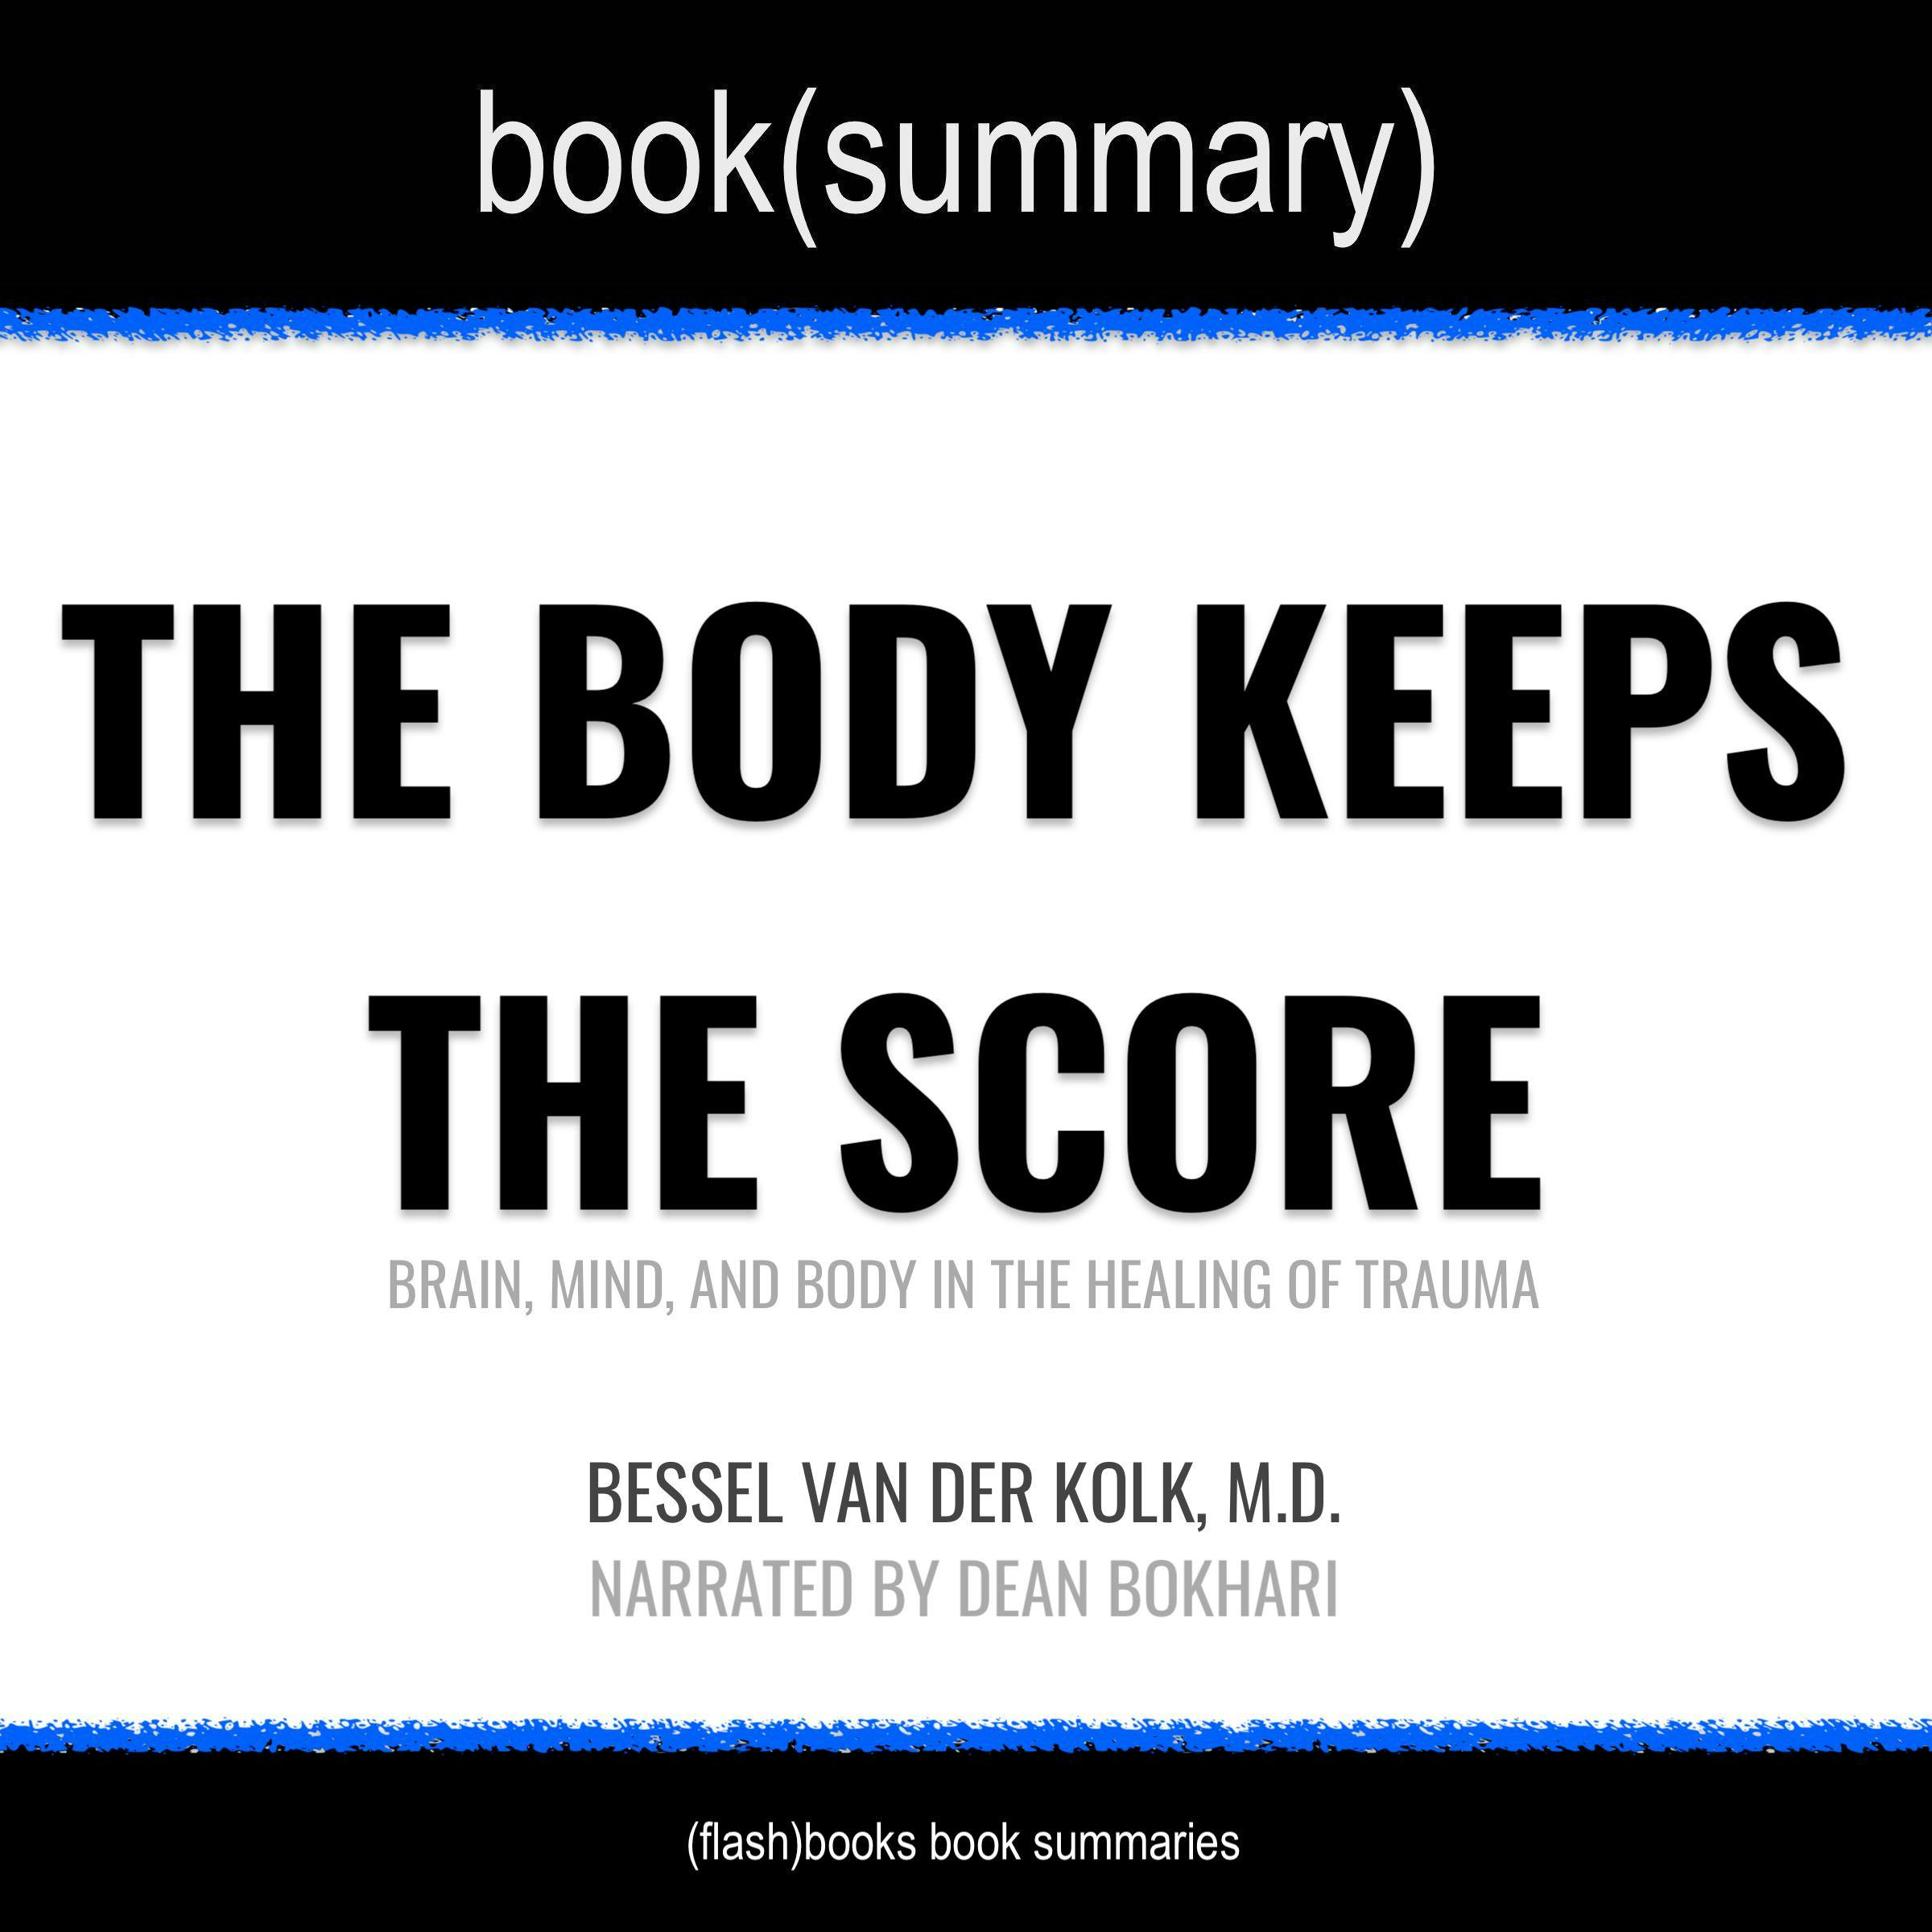 The Body Keeps the Score by Bessel Van der Kolk, M.D. - Book Summary: Brain, Mind, and Body in the Healing of Trauma - undefined